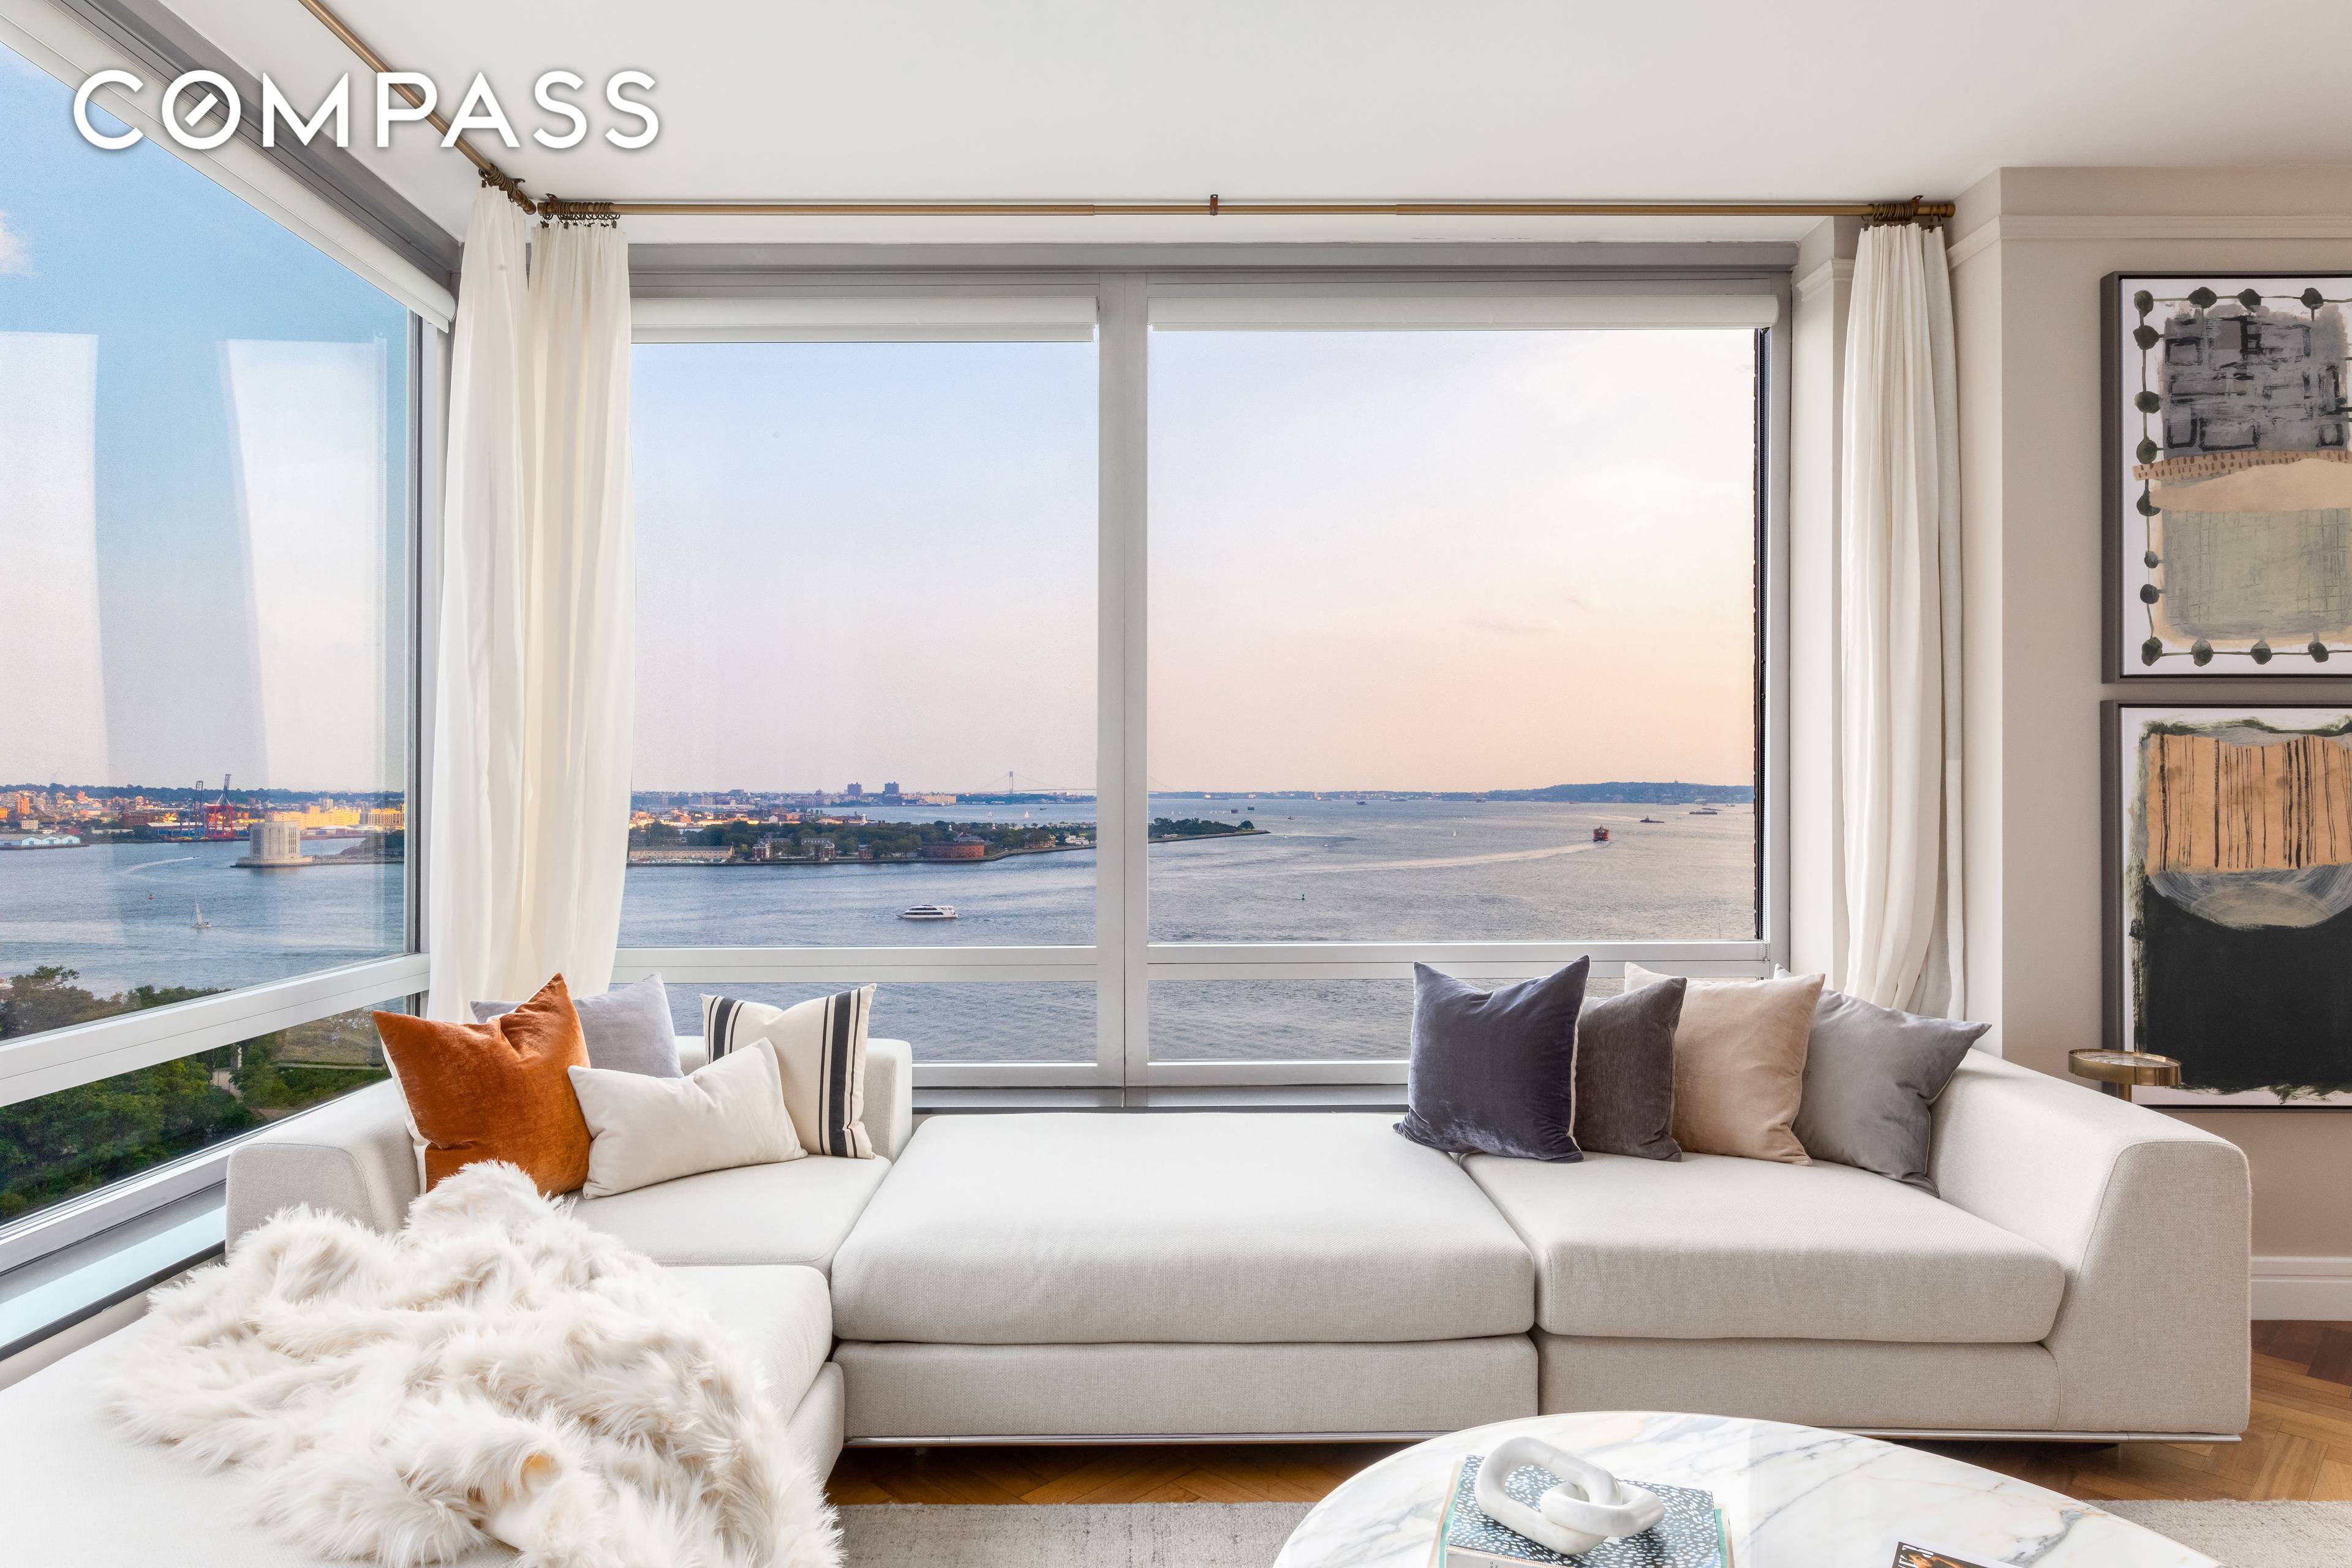 BRIGHT SOUTH FACING HOME WITH UNOBSTUCTED WATER VIEWS ENJOY NATURAL SUNRISE TO SUNSET IN THIS EXPANSIVE AND OPULENT 3 BED 3BATH The Ritz Carlton Residences has been highly regarded and ...